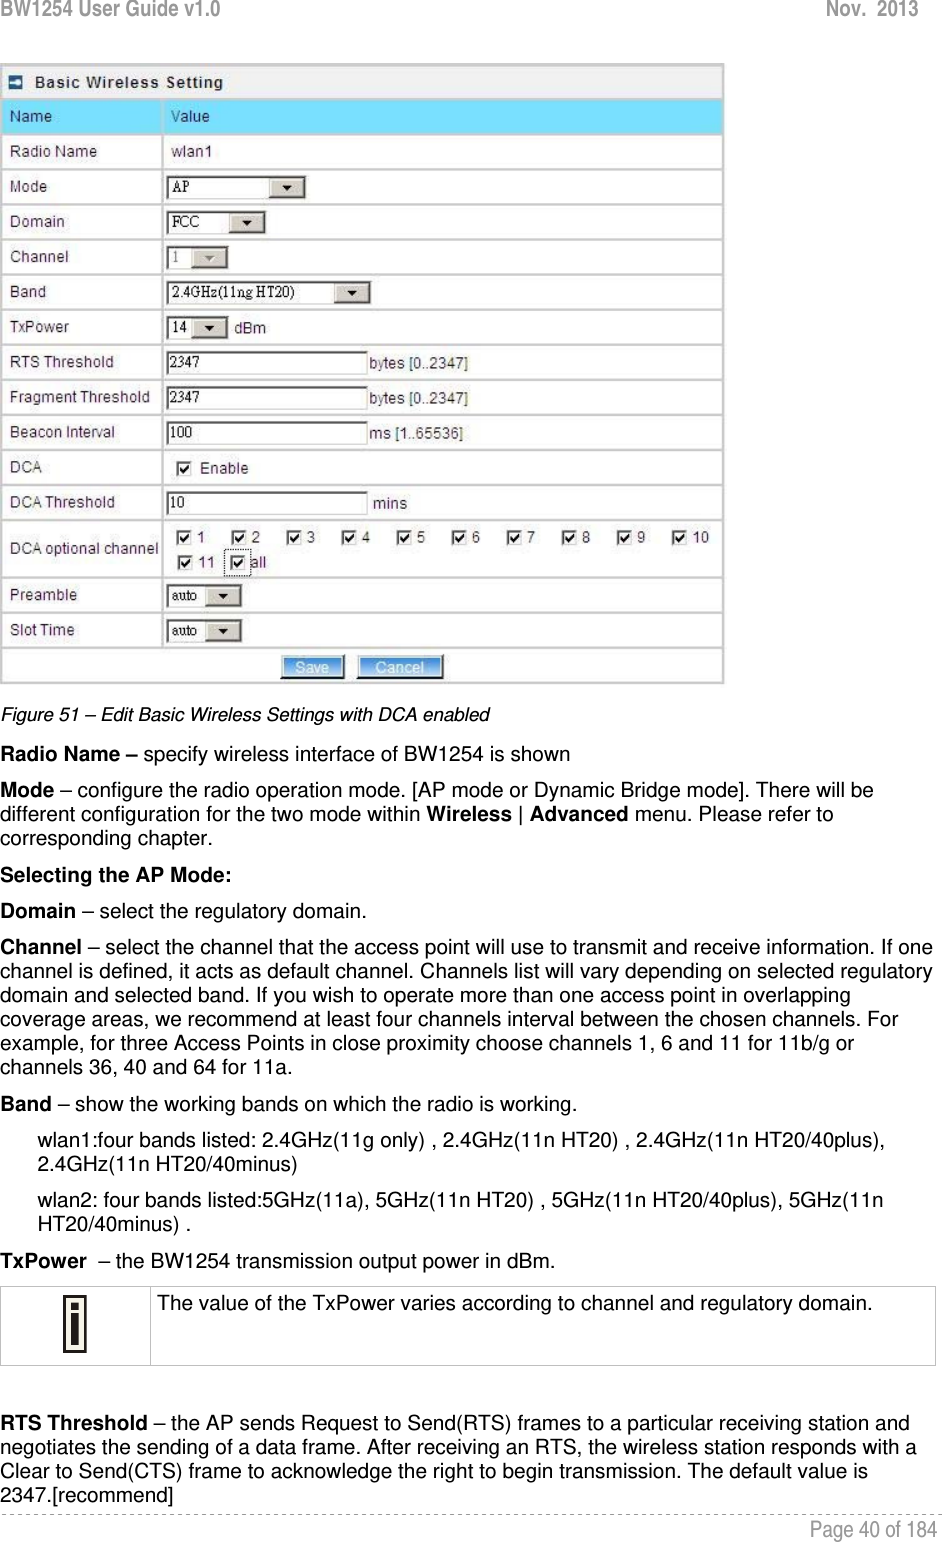 BW1254 User Guide v1.0  Nov.  2013     Page 40 of 184    Figure 51 – Edit Basic Wireless Settings with DCA enabled Radio Name – specify wireless interface of BW1254 is shown Mode – configure the radio operation mode. [AP mode or Dynamic Bridge mode]. There will be different configuration for the two mode within Wireless | Advanced menu. Please refer to corresponding chapter. Selecting the AP Mode: Domain – select the regulatory domain. Channel – select the channel that the access point will use to transmit and receive information. If one channel is defined, it acts as default channel. Channels list will vary depending on selected regulatory domain and selected band. If you wish to operate more than one access point in overlapping coverage areas, we recommend at least four channels interval between the chosen channels. For example, for three Access Points in close proximity choose channels 1, 6 and 11 for 11b/g or channels 36, 40 and 64 for 11a.  Band – show the working bands on which the radio is working.  wlan1:four bands listed: 2.4GHz(11g only) , 2.4GHz(11n HT20) , 2.4GHz(11n HT20/40plus), 2.4GHz(11n HT20/40minus)  wlan2: four bands listed:5GHz(11a), 5GHz(11n HT20) , 5GHz(11n HT20/40plus), 5GHz(11n HT20/40minus) . TxPower  – the BW1254 transmission output power in dBm.   The value of the TxPower varies according to channel and regulatory domain.  RTS Threshold – the AP sends Request to Send(RTS) frames to a particular receiving station and negotiates the sending of a data frame. After receiving an RTS, the wireless station responds with a Clear to Send(CTS) frame to acknowledge the right to begin transmission. The default value is 2347.[recommend] 